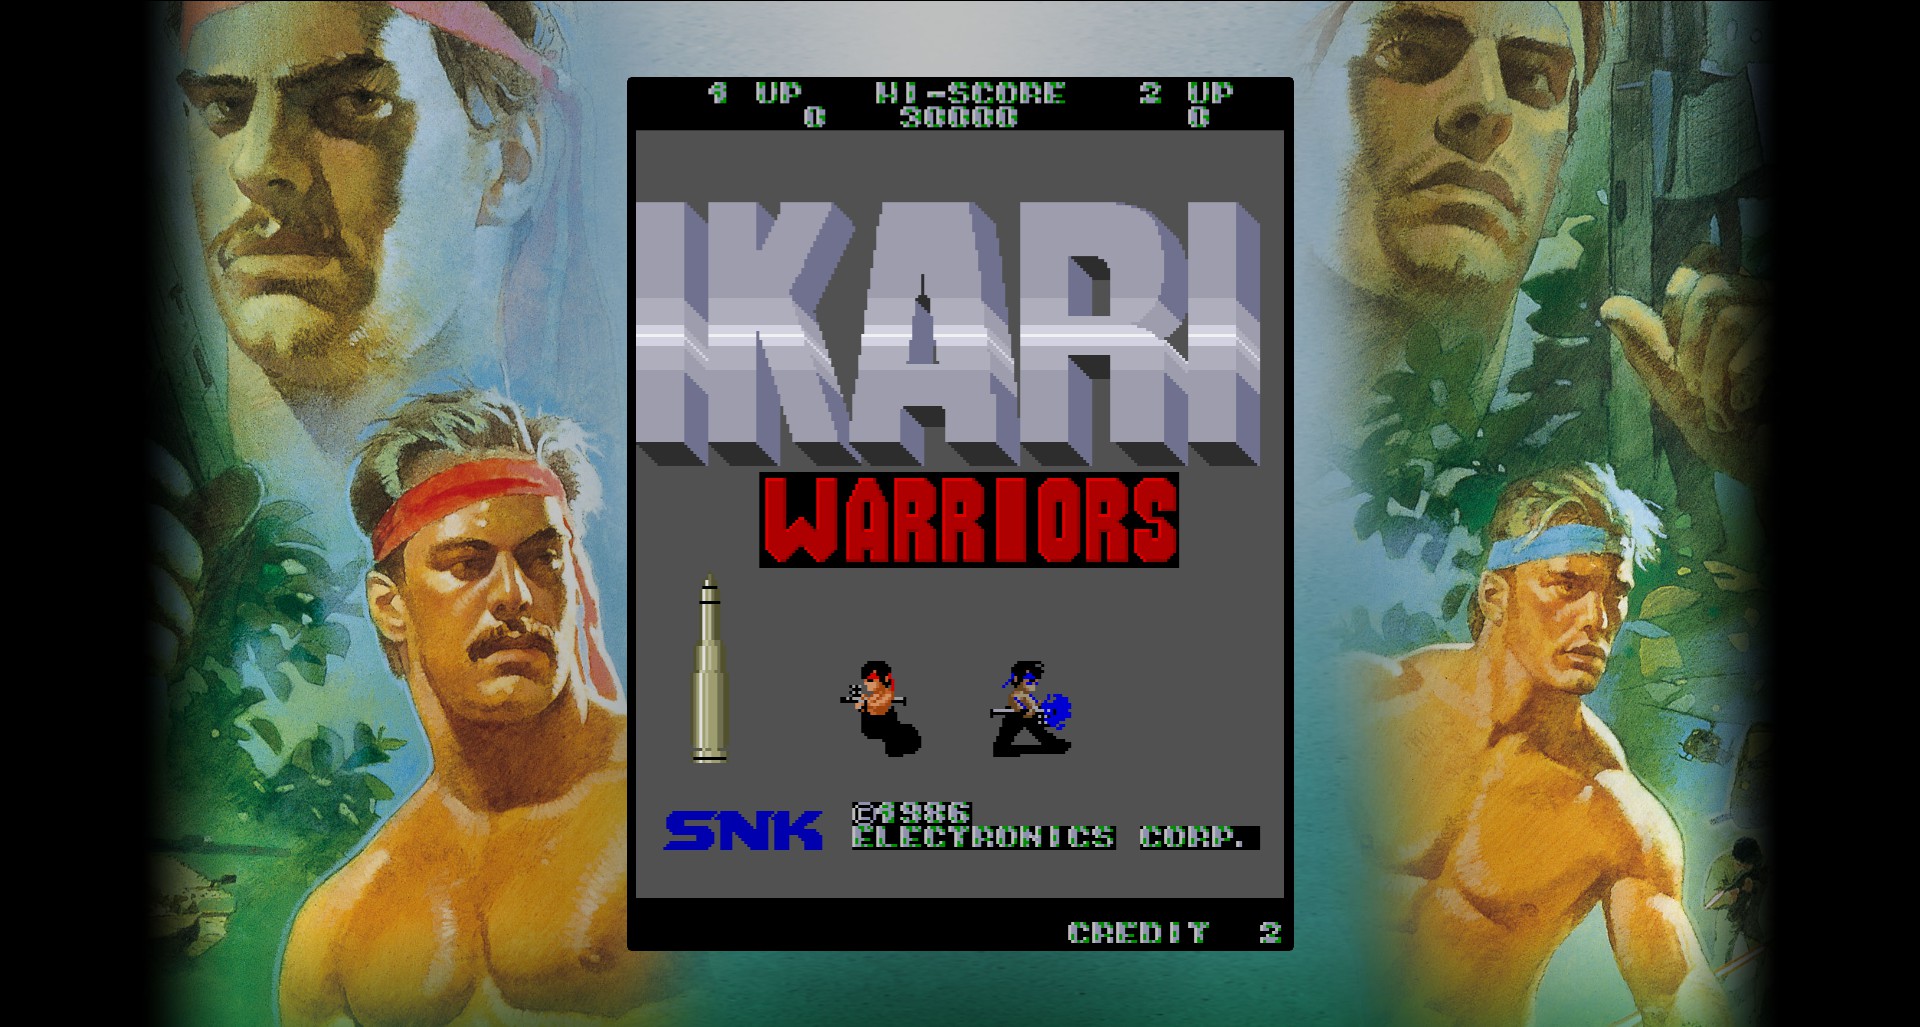 SNK 40th ANNIVERSARY COLLECTION Free Download